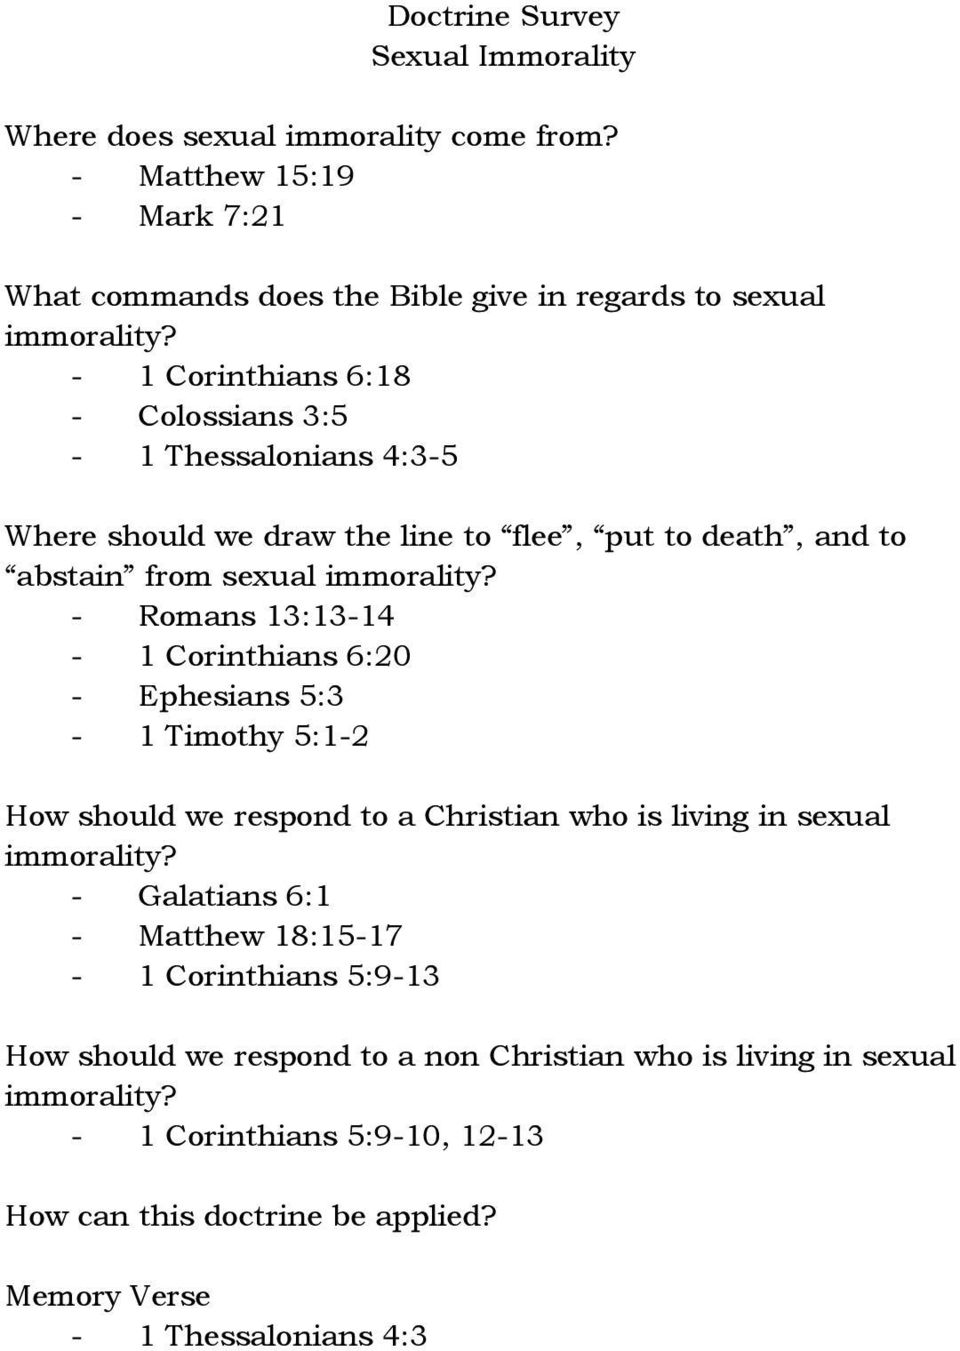 - Romans 13:13-14 - 1 Corinthians 6:20 - Ephesians 5:3-1 Timothy 5:1-2 How should we respond to a Christian who is living in sexual immorality?